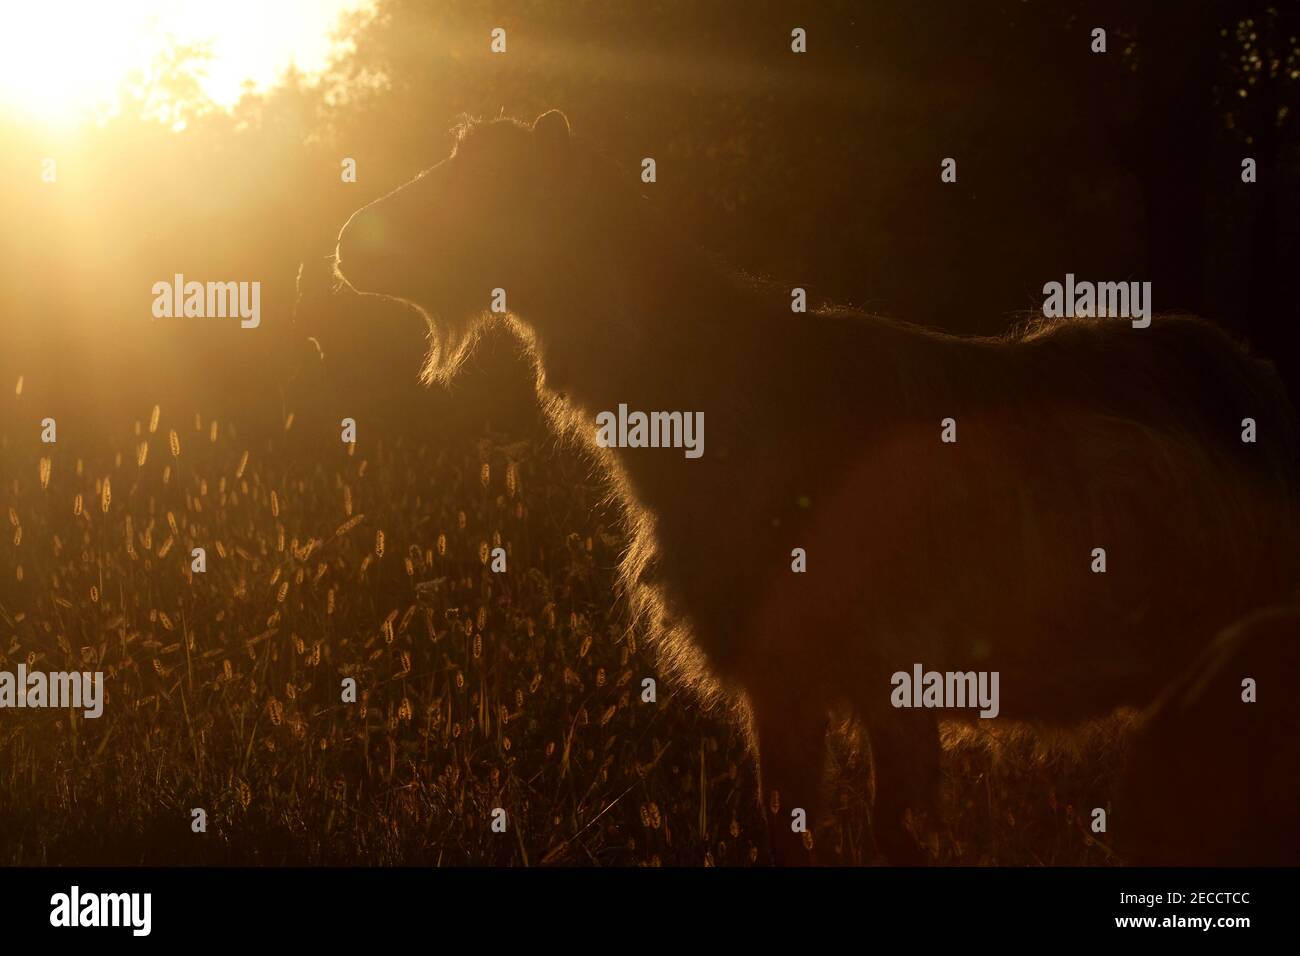 A domesticated goat in a field in Romania seen against the sun Stock Photo